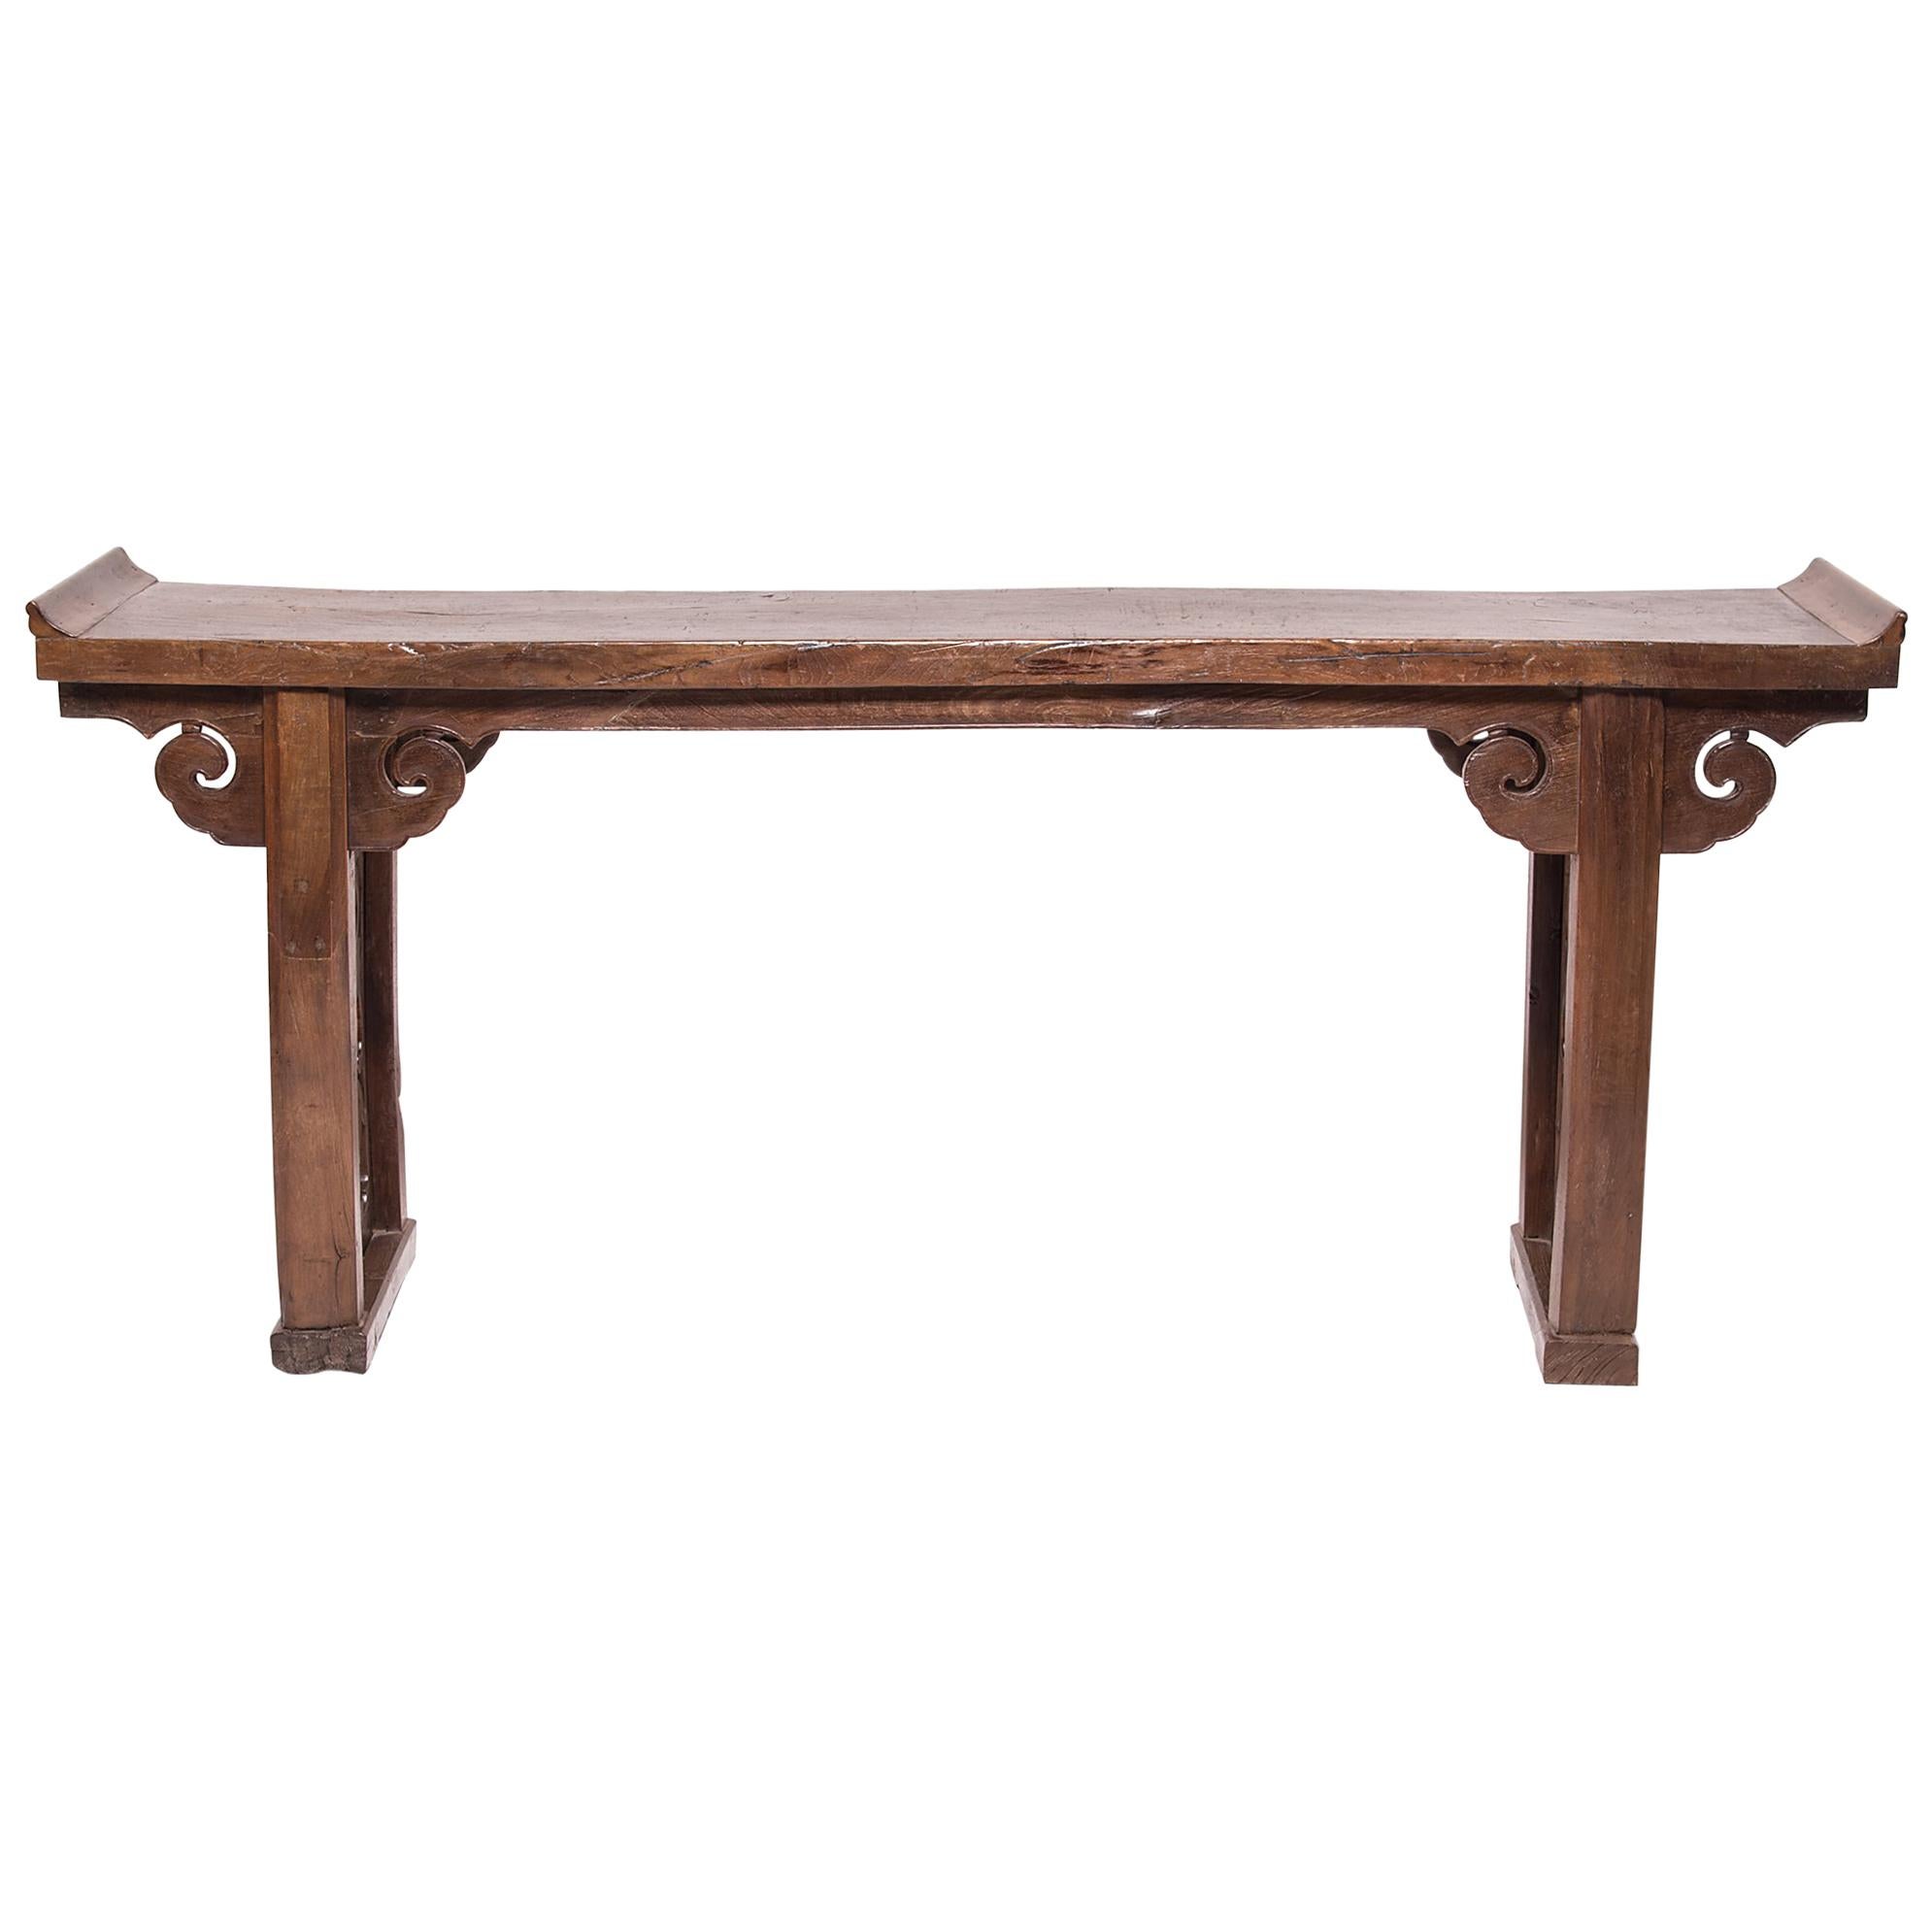 19th Century Chinese Plank Top Longevity Altar with Everted Ends